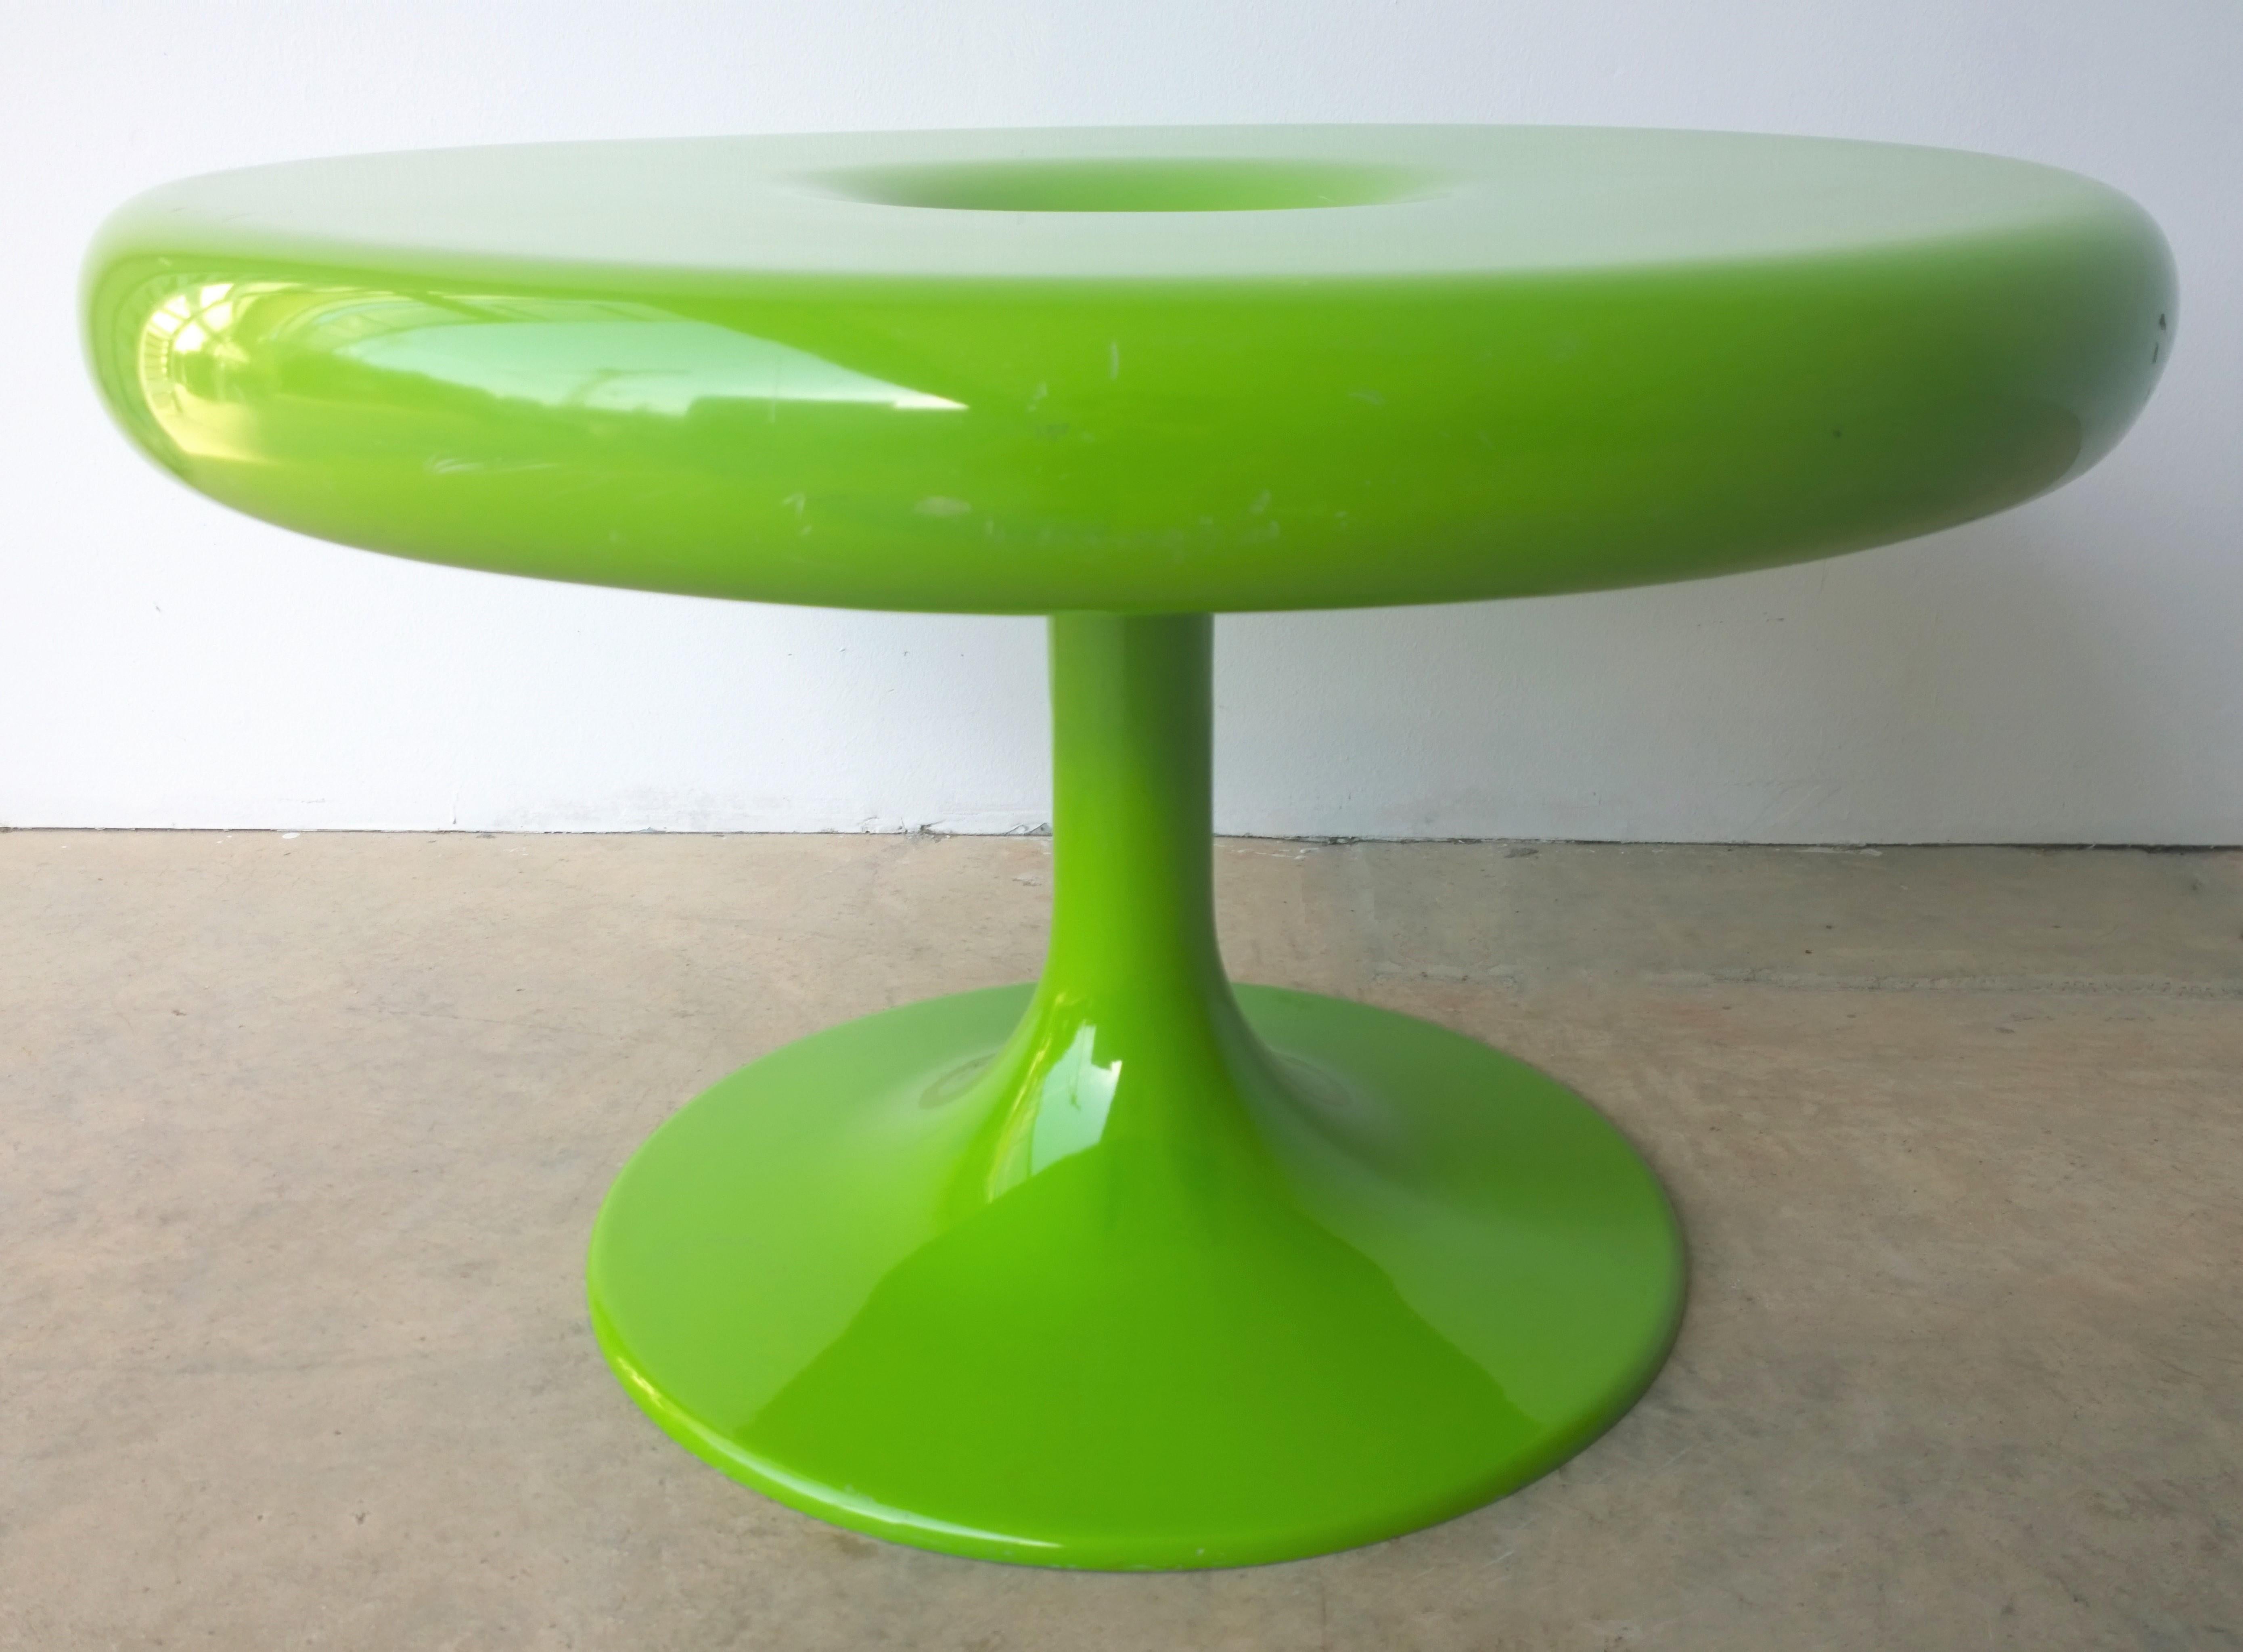 Offered is a Mid-Century Modern Eero Aarnio Kantarelli for Asko of Finland molded plastic / fiberglass round top with pedestal occasional / side table / small cocktail or coffee table in apple / Chartreuse green. This molded plastic occasional /